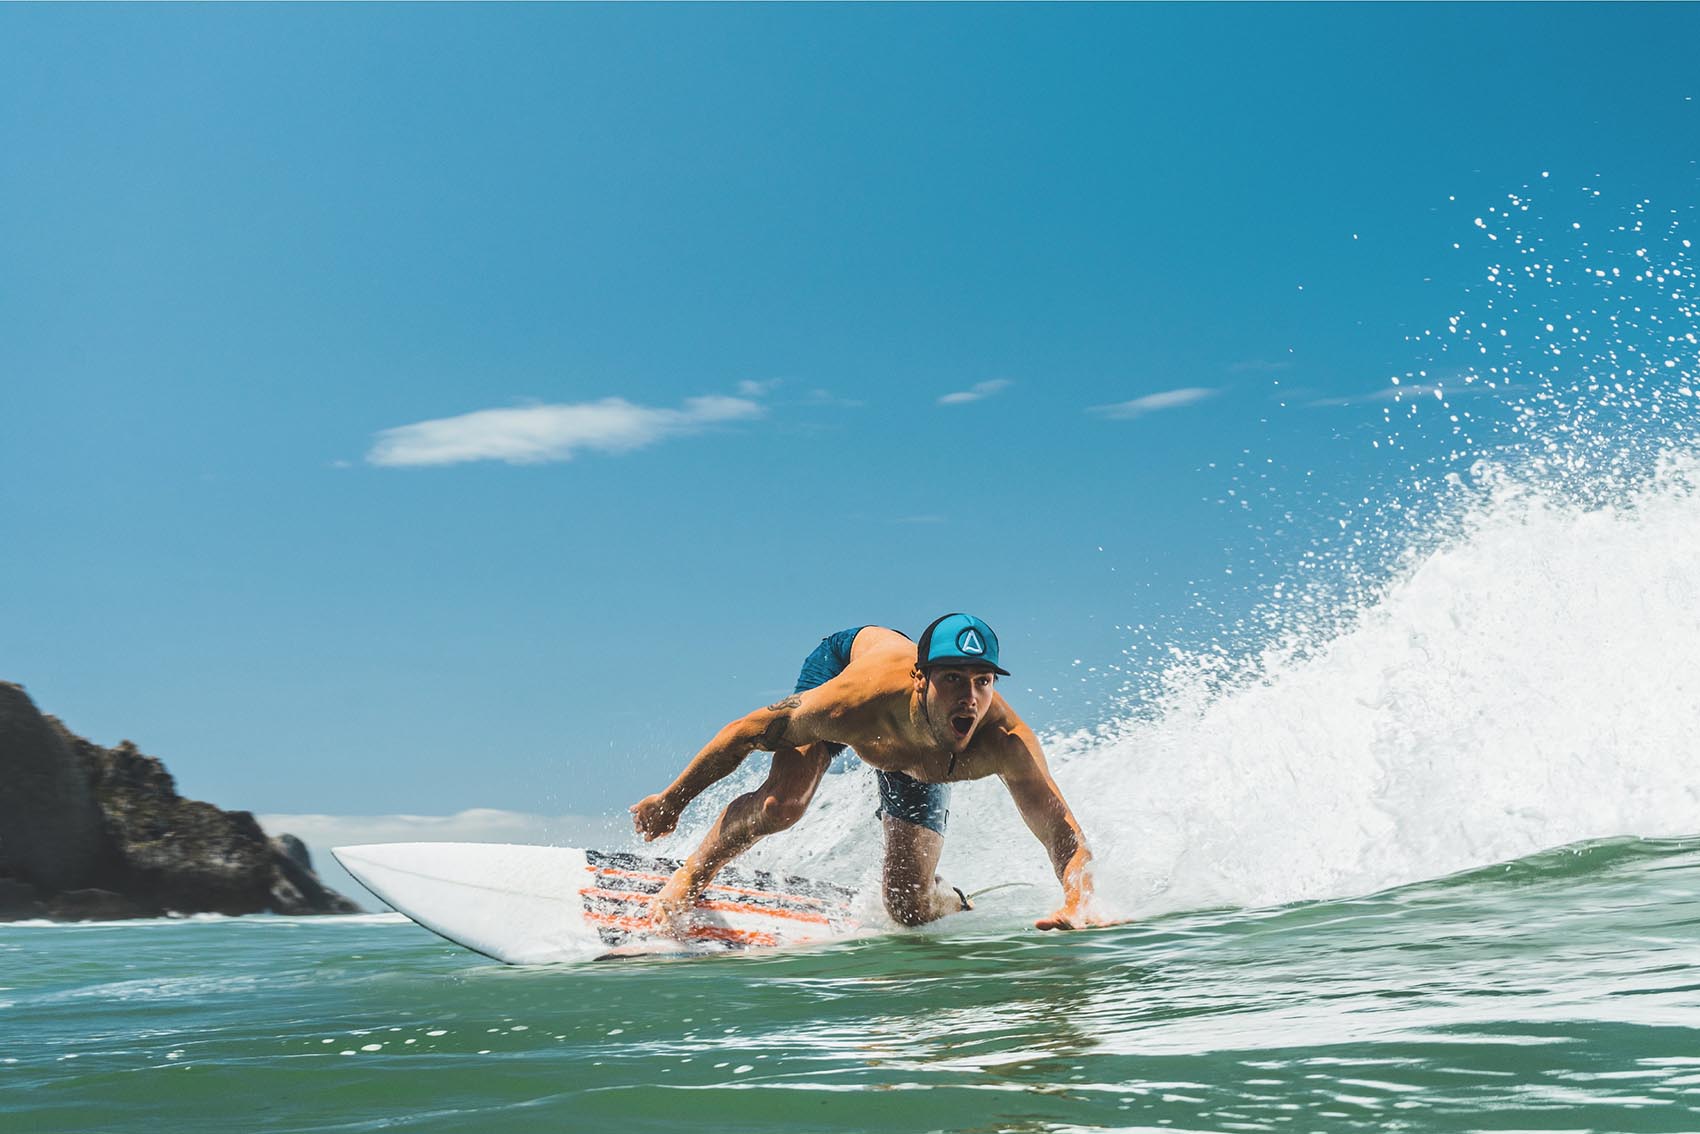 The Best Surf Hats: Sizing, Durability, Prices and More